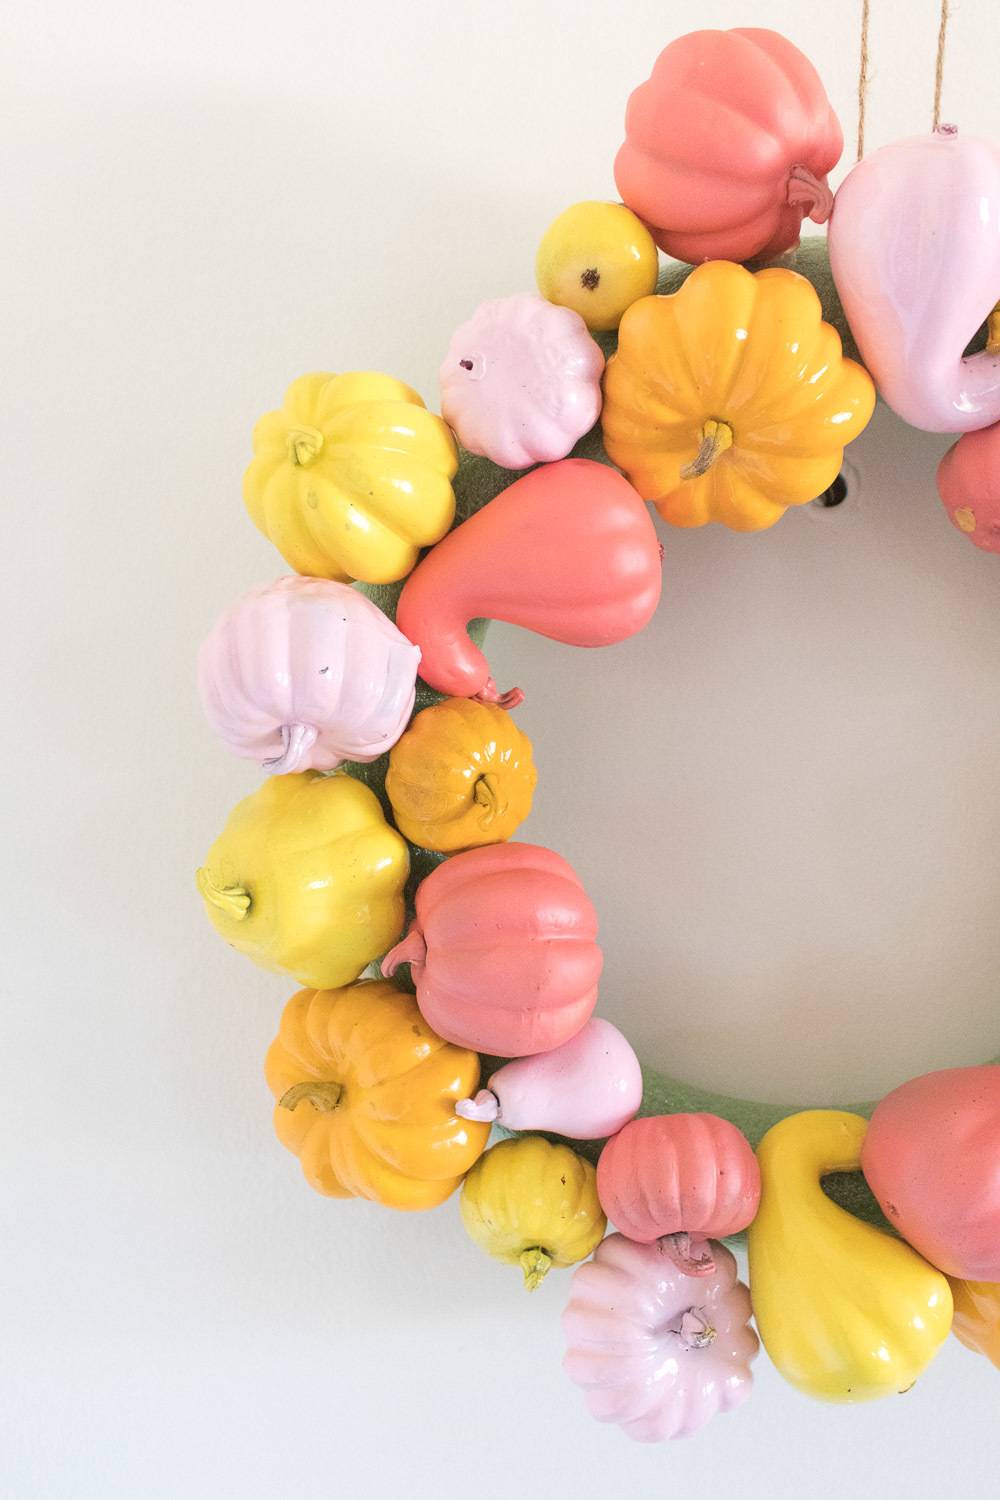 Small wreath made with small painted pumpkins and squash.